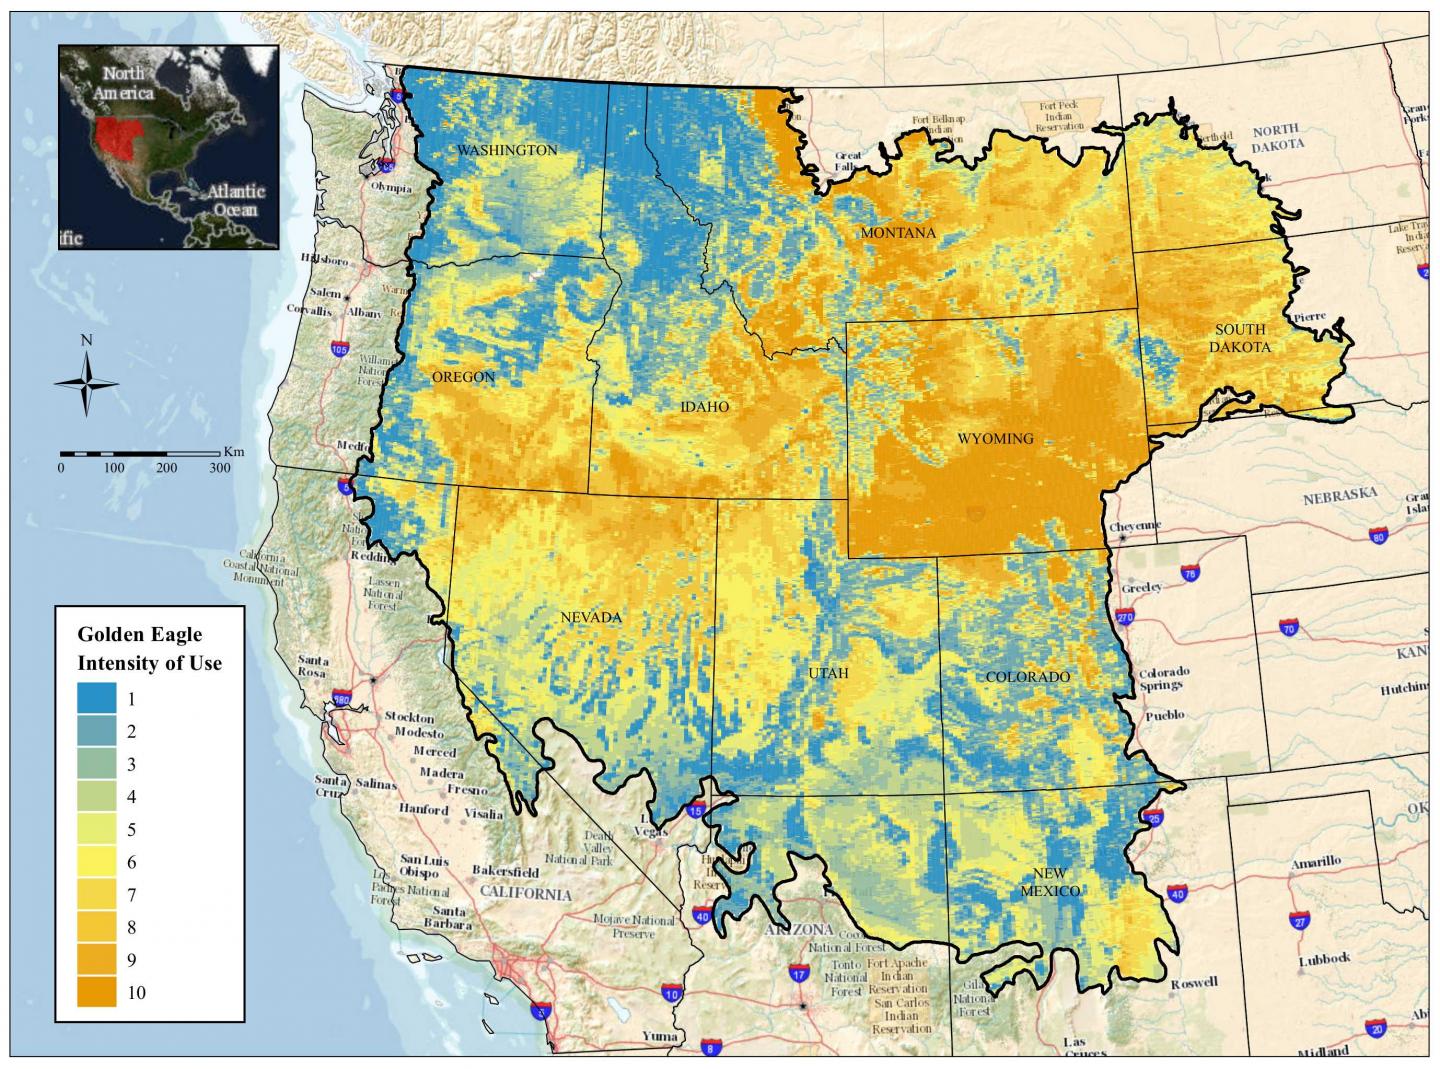 Golden Eagles May Be More Abundant in Undeveloped Landscapes with High Elevation, Wind Speed